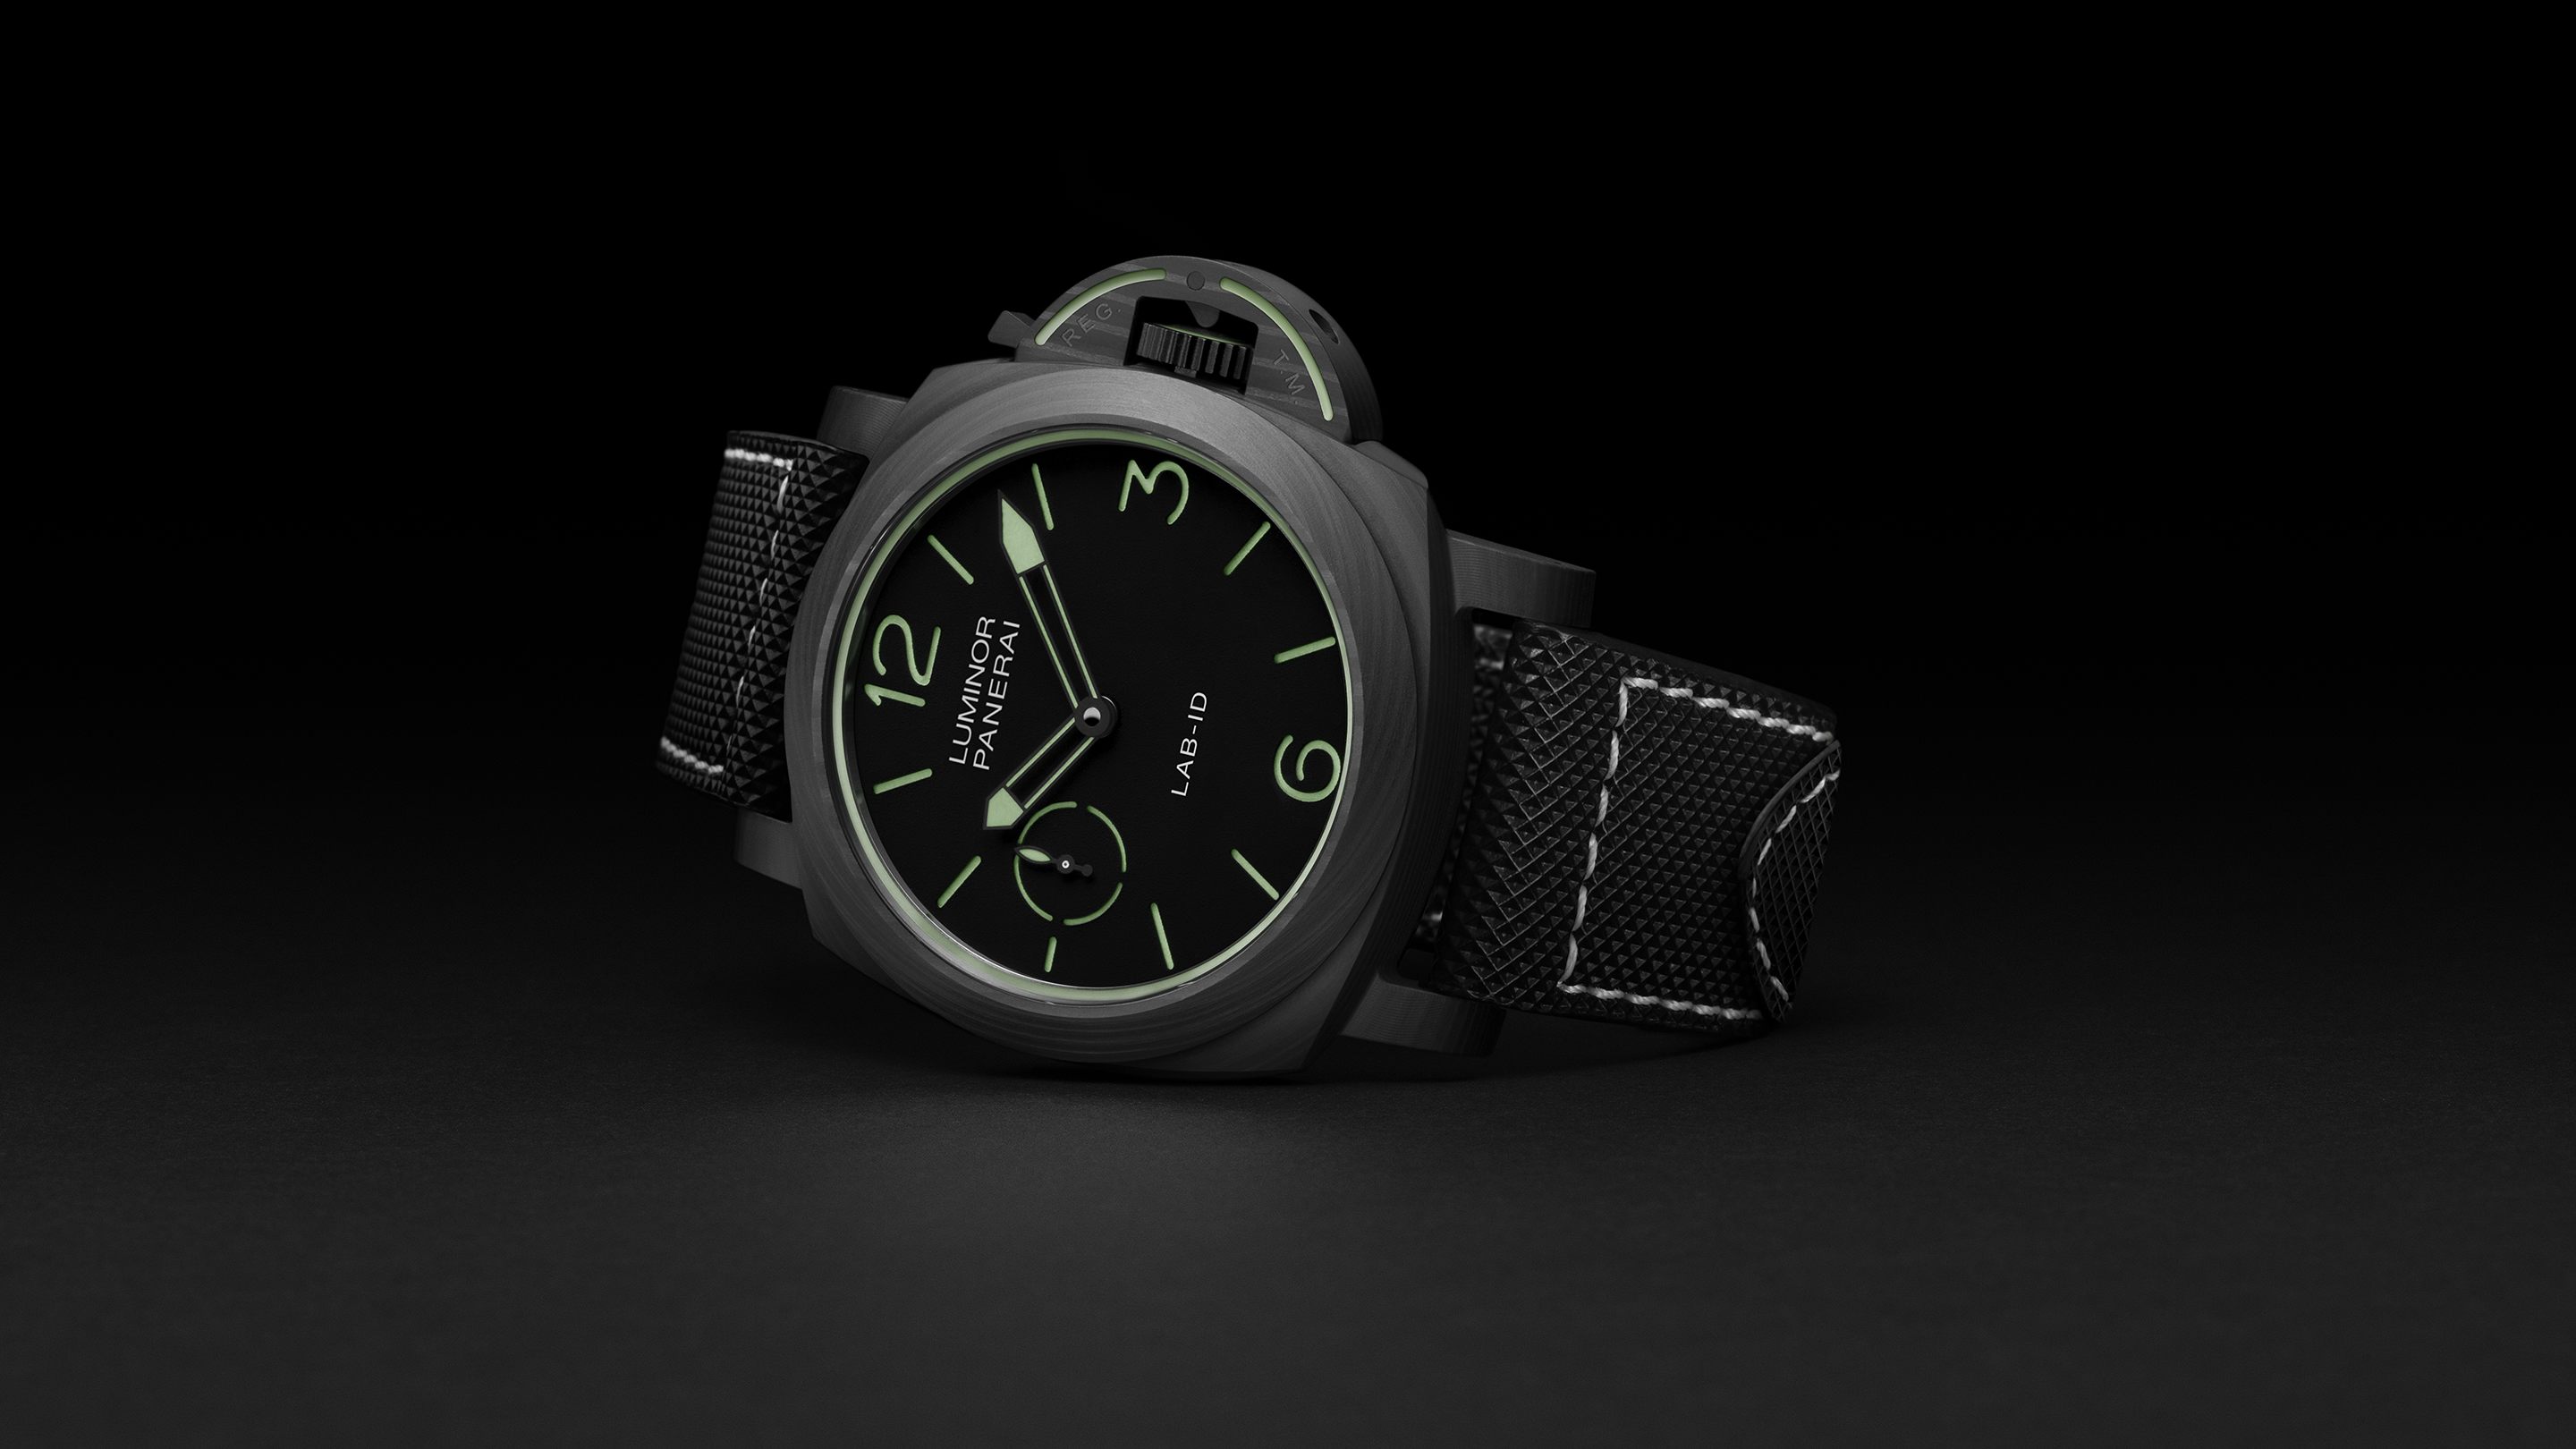 Introducing: The Panerai LAB ID PAM1700 With 70-Year Guarantee